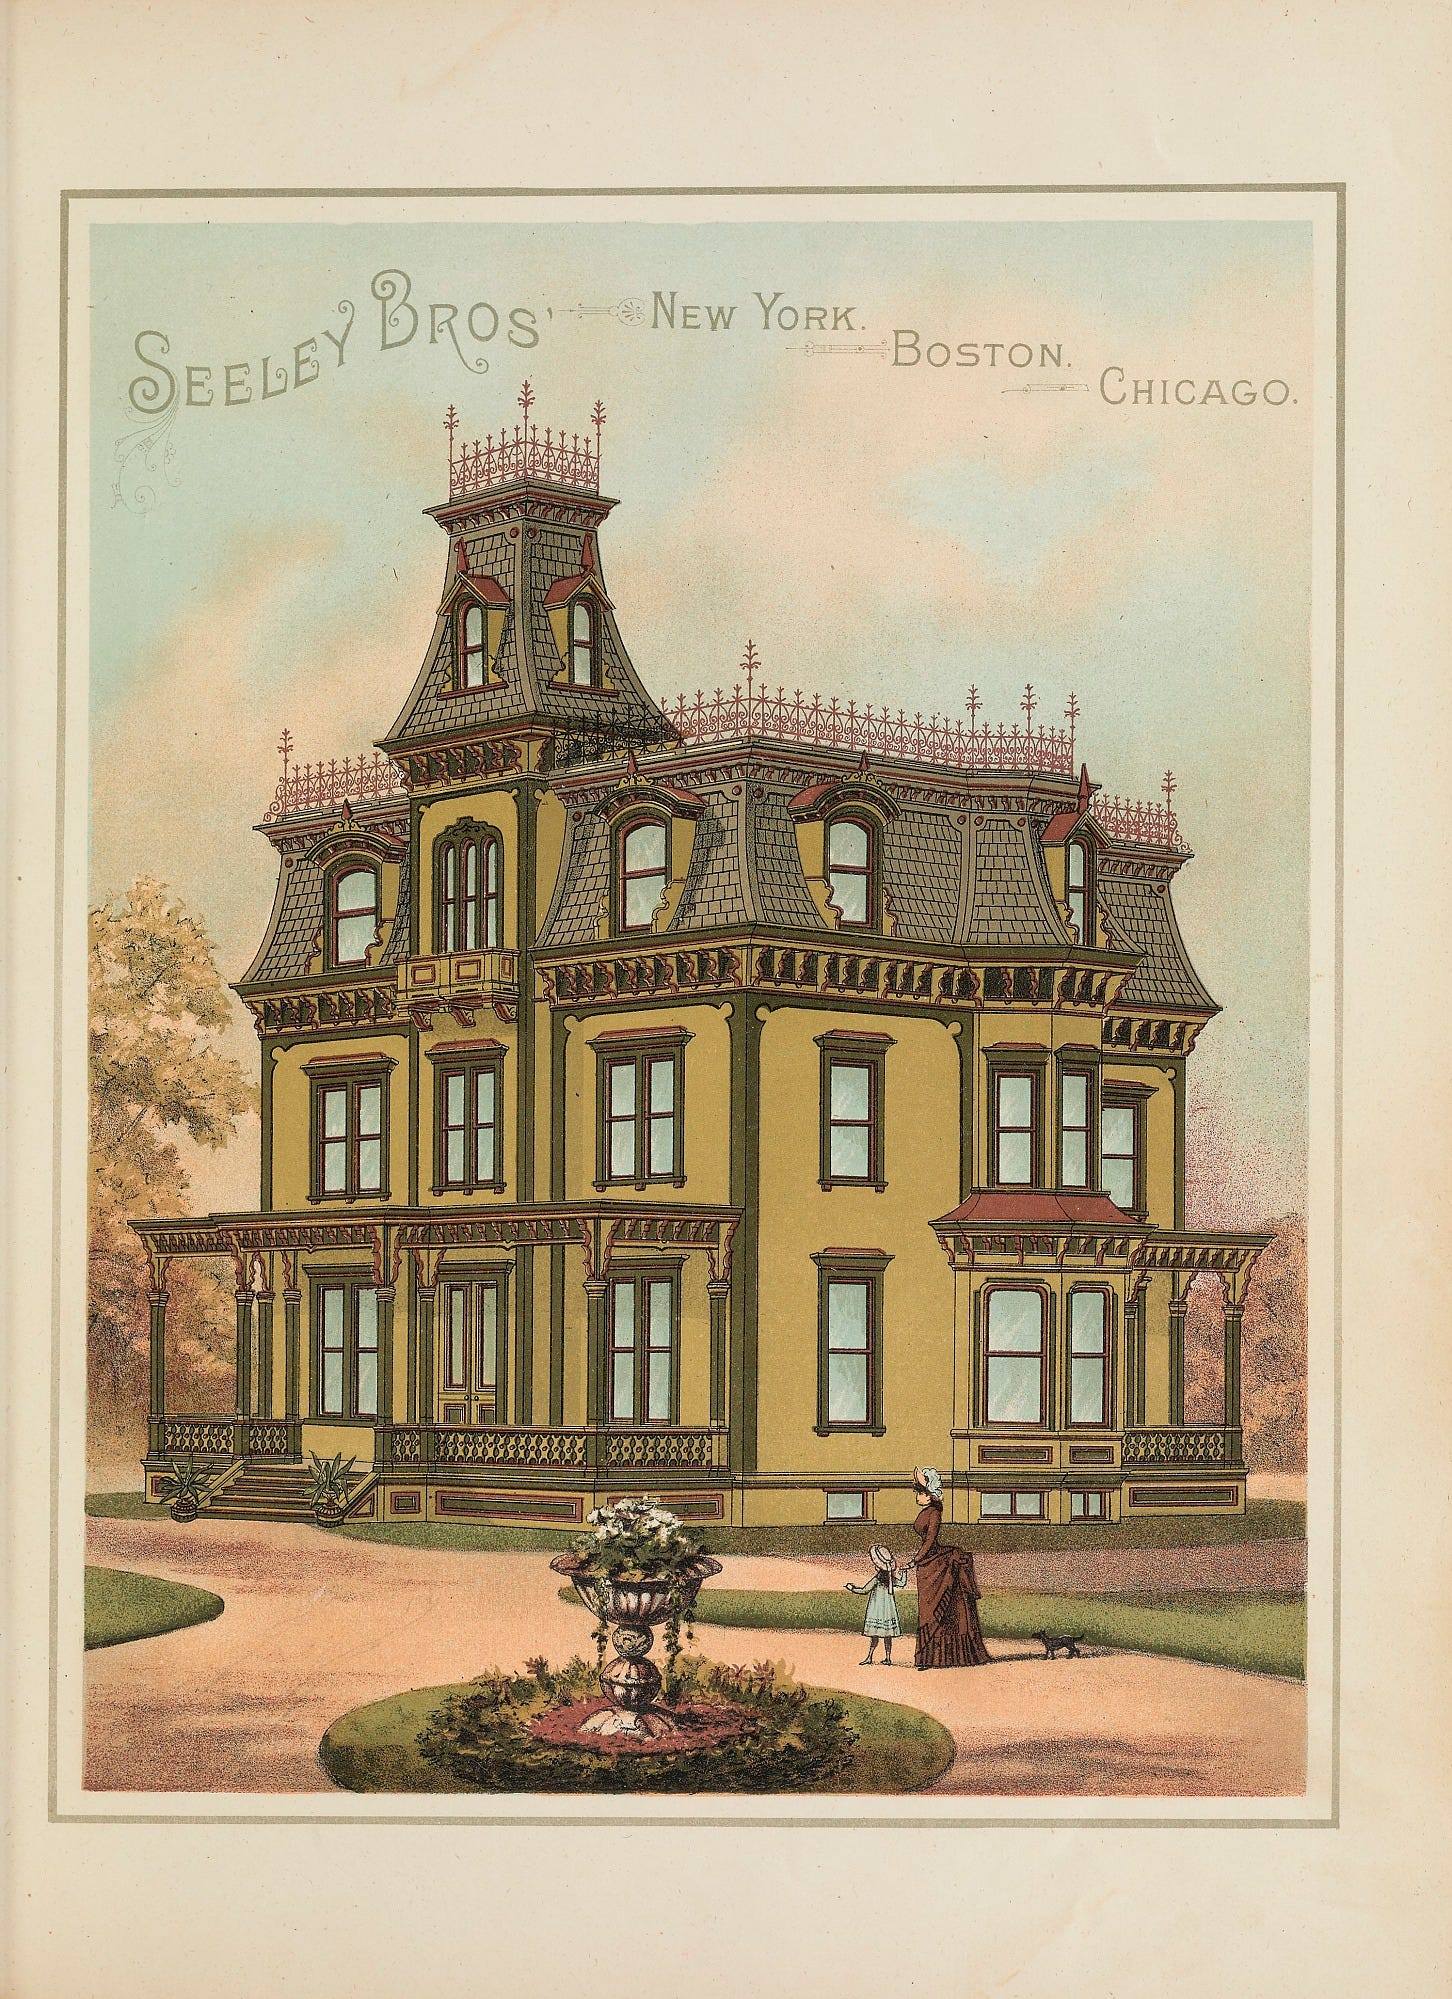 Advertisement for Seeley Brothers Paint Company. An illustration of a Second Empire house painted in three colors. The body is a straw yellow, the main accent color is brownstone, and the window sash color is a rich red. 